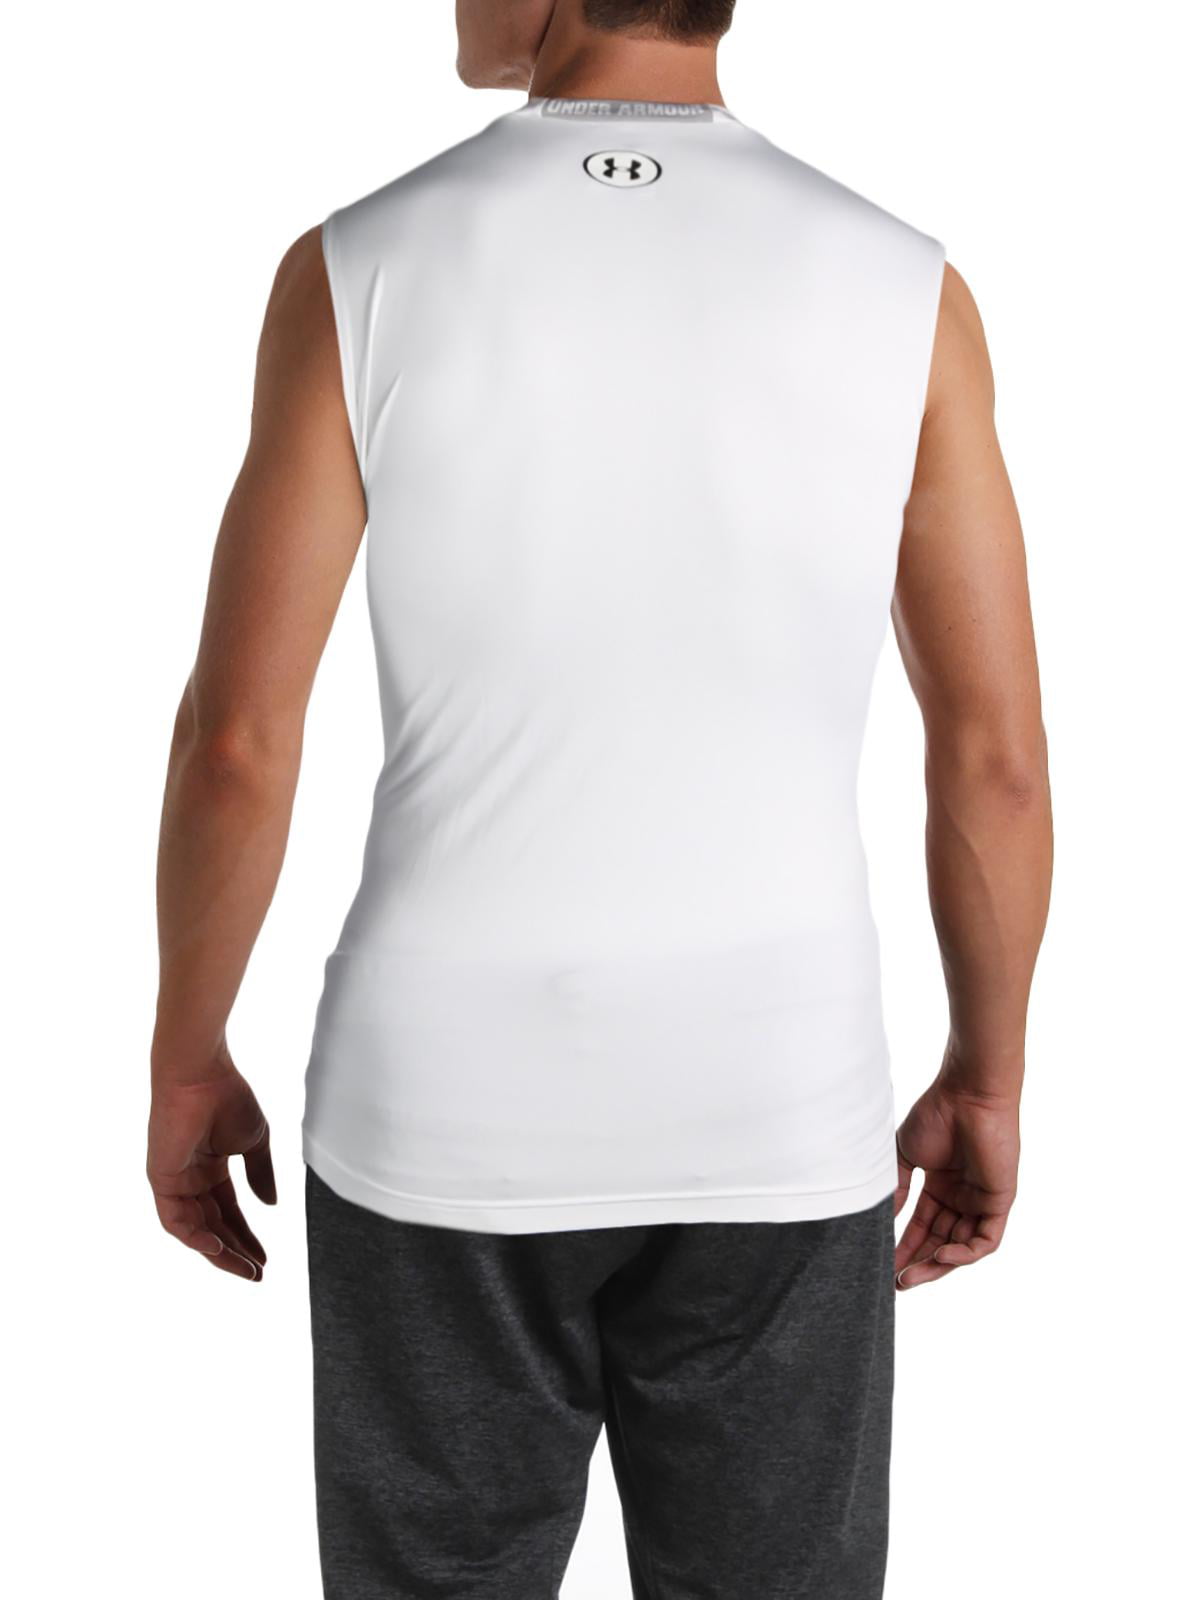 Under Armour Mens Heat Gear Compression Tank Top 